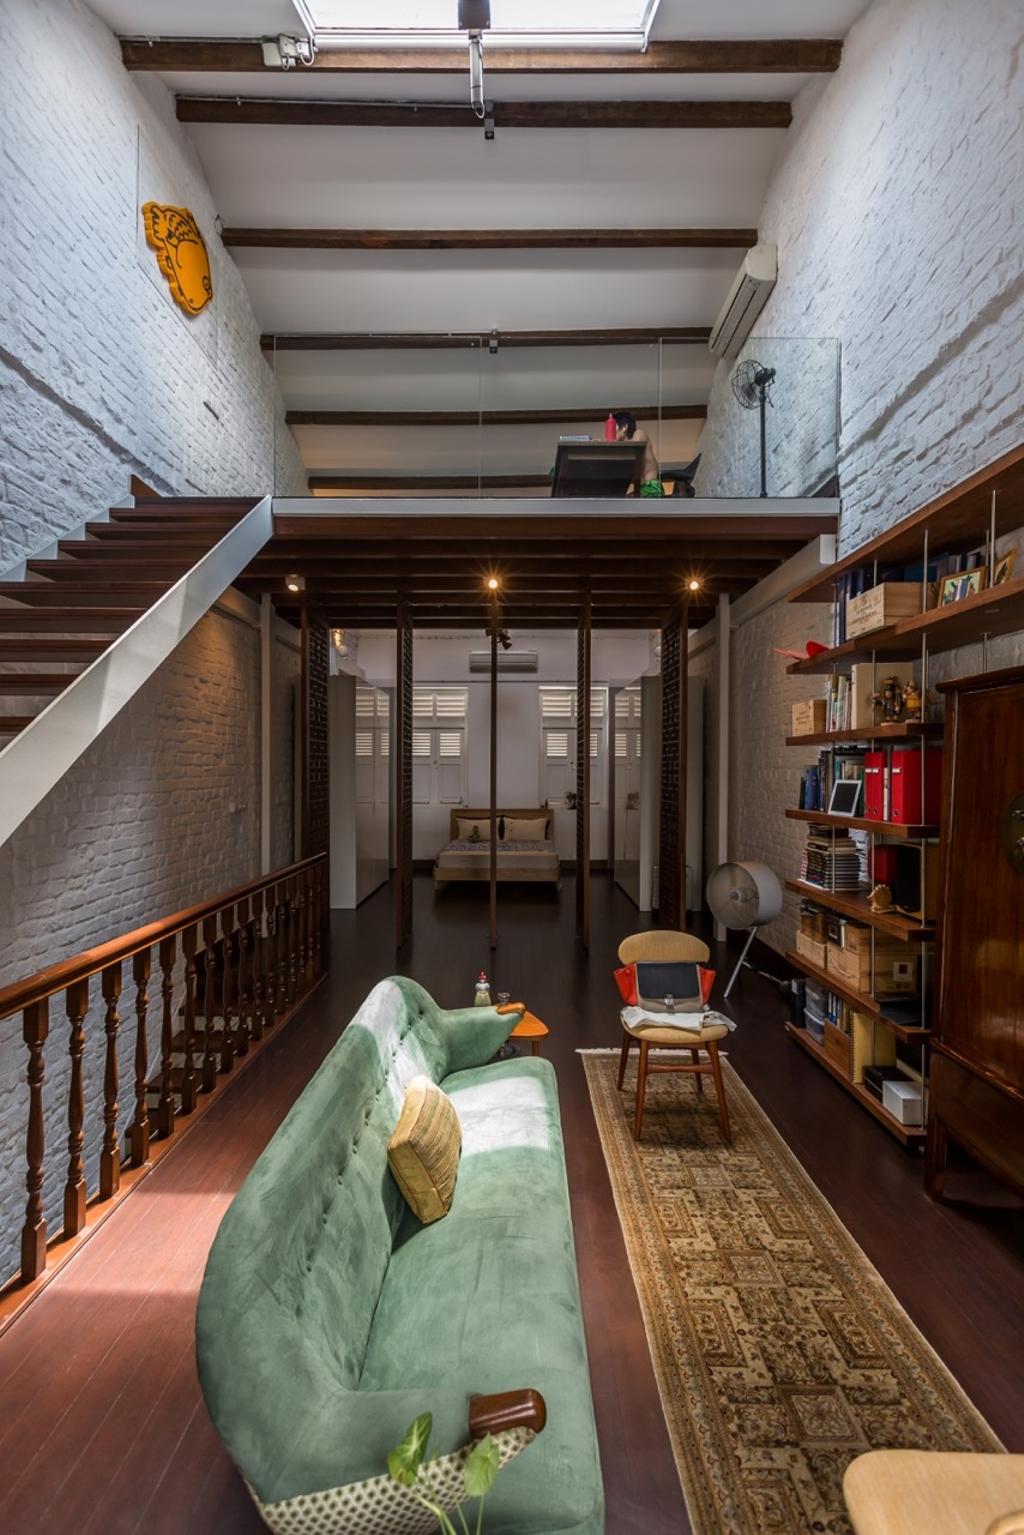 Contemporary, Landed, Living Room, Onan Road, Architect, EZRA Architects, Wooden Flooring, Long Rug, Long Carpet, Blue Sofa, Turquoise Sofa, Red Brick Wall, Wooden Bookshelf, Wood Ceiling, Banister, Handrail, Staircase, Shelf, Bookcase, Furniture